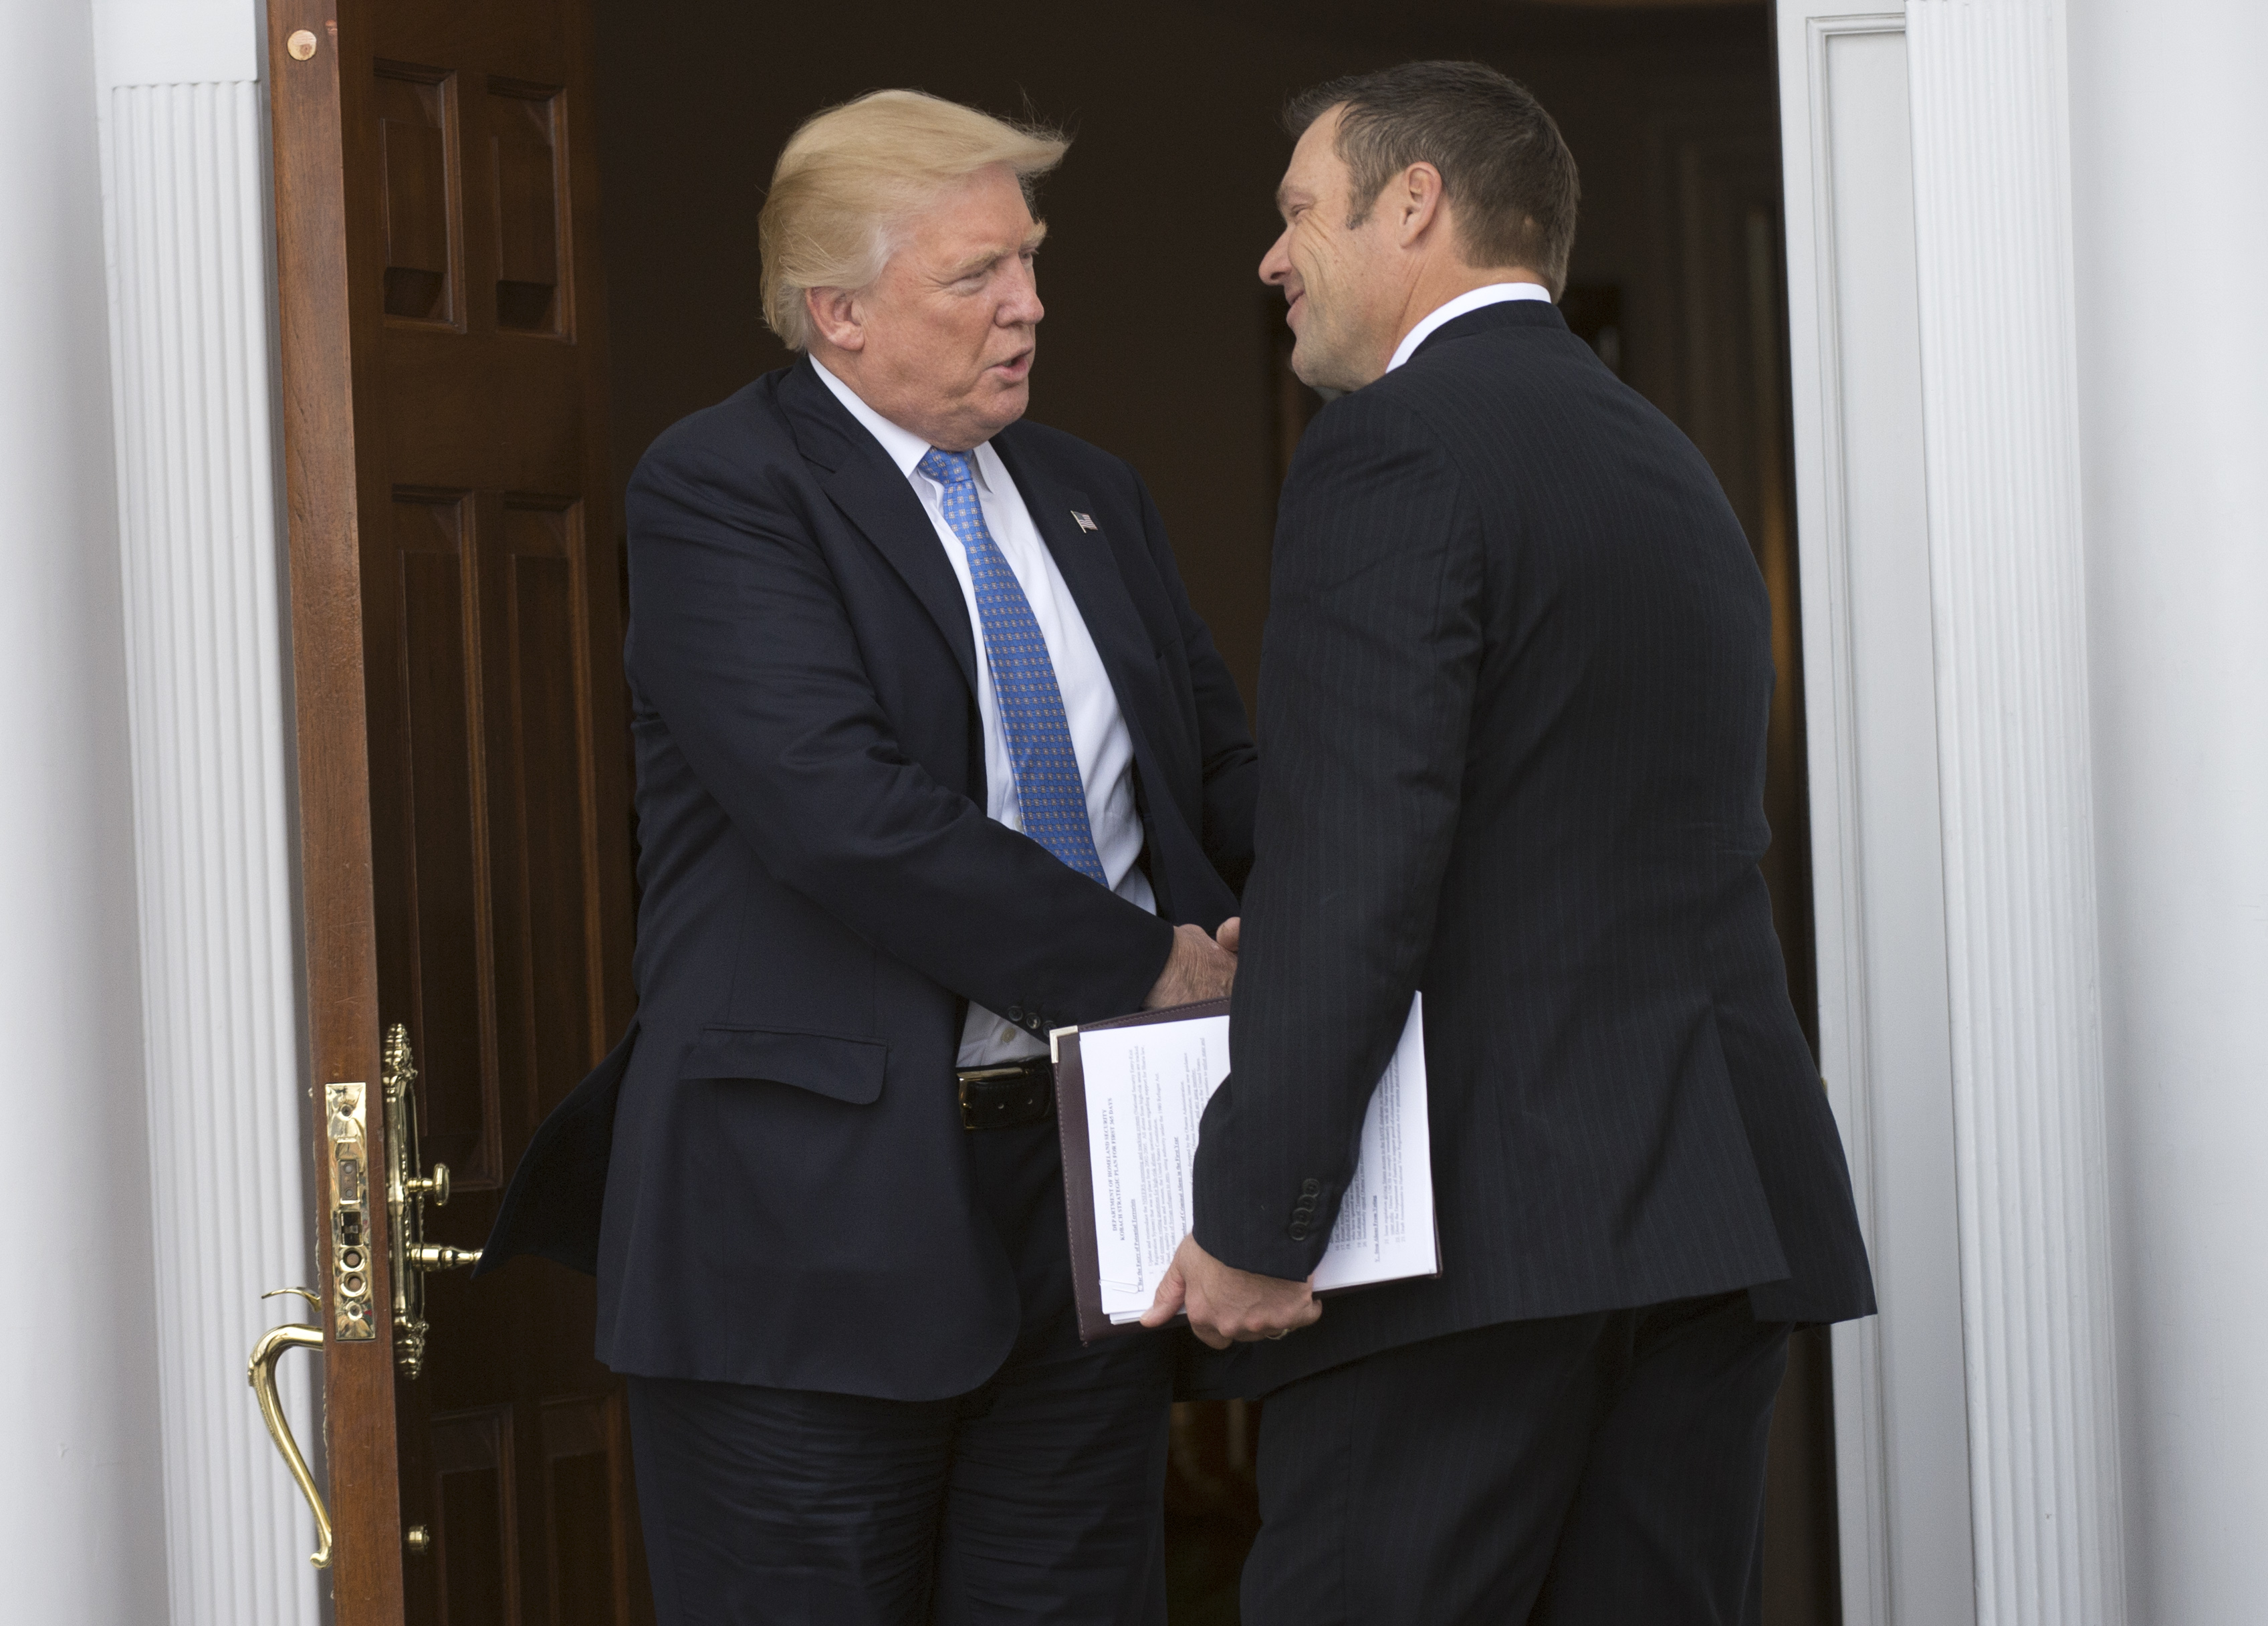 President Donald Trump meets with Kris Kobach at the Trump National Golf Club in Bedminster, New Jersey on November 20, 2016. (Don Emmert/AFP/Getty Images)